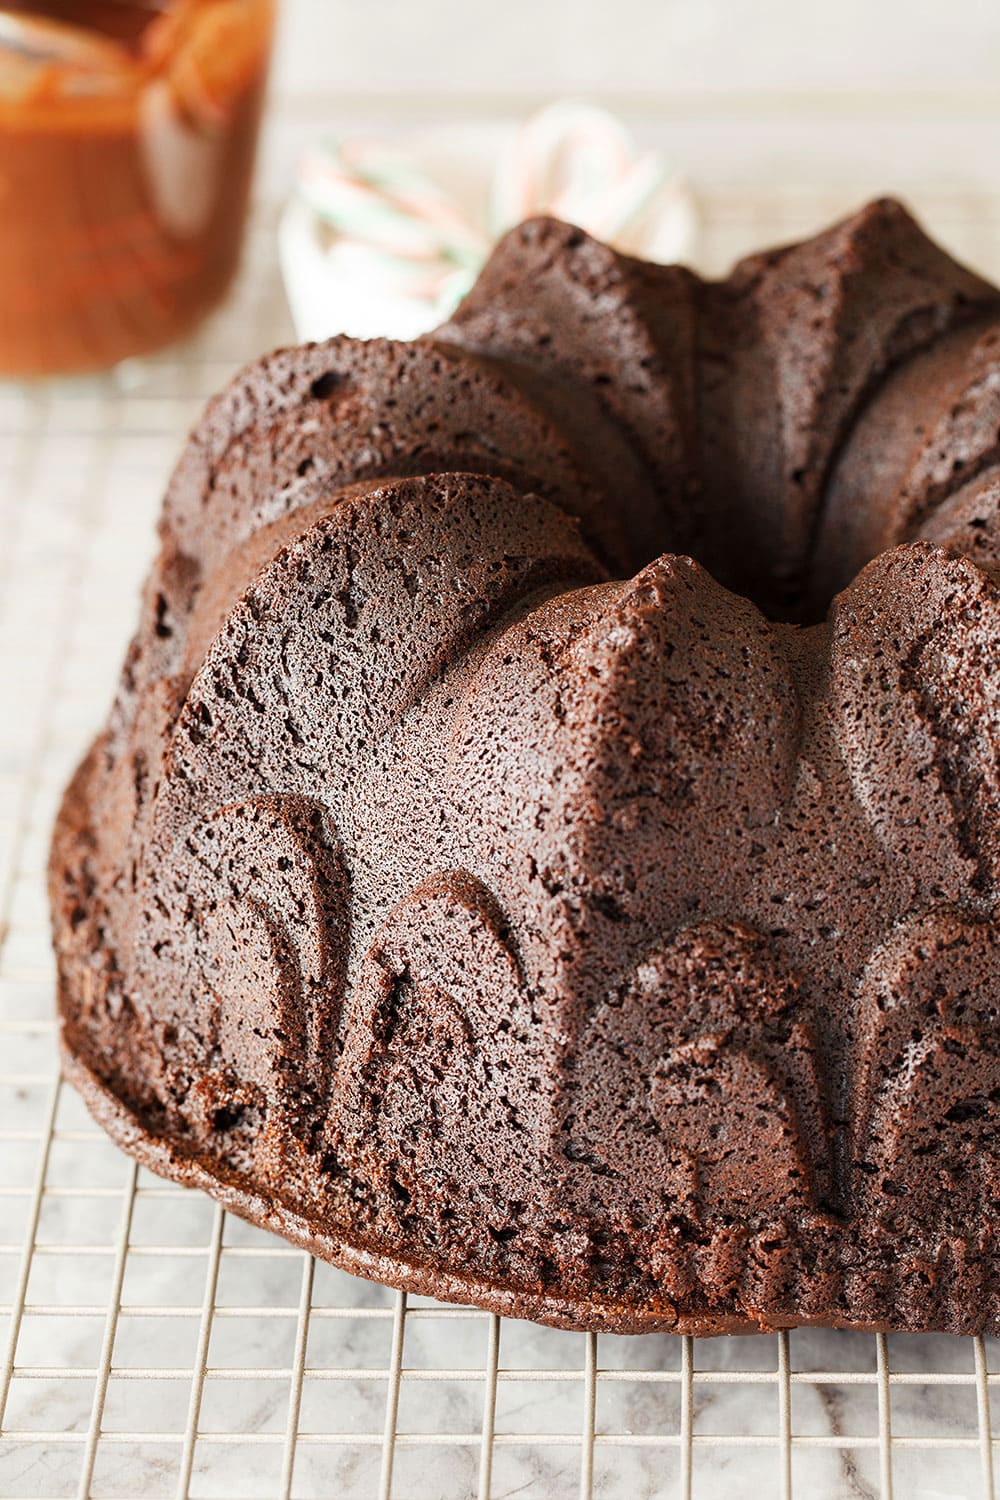 Peppermint Mocha Bundt Cake is the absolute PERFECT holiday cake! It's as easy as it is beautiful and loaded with chocolate, coffee, and peppermint flavors.